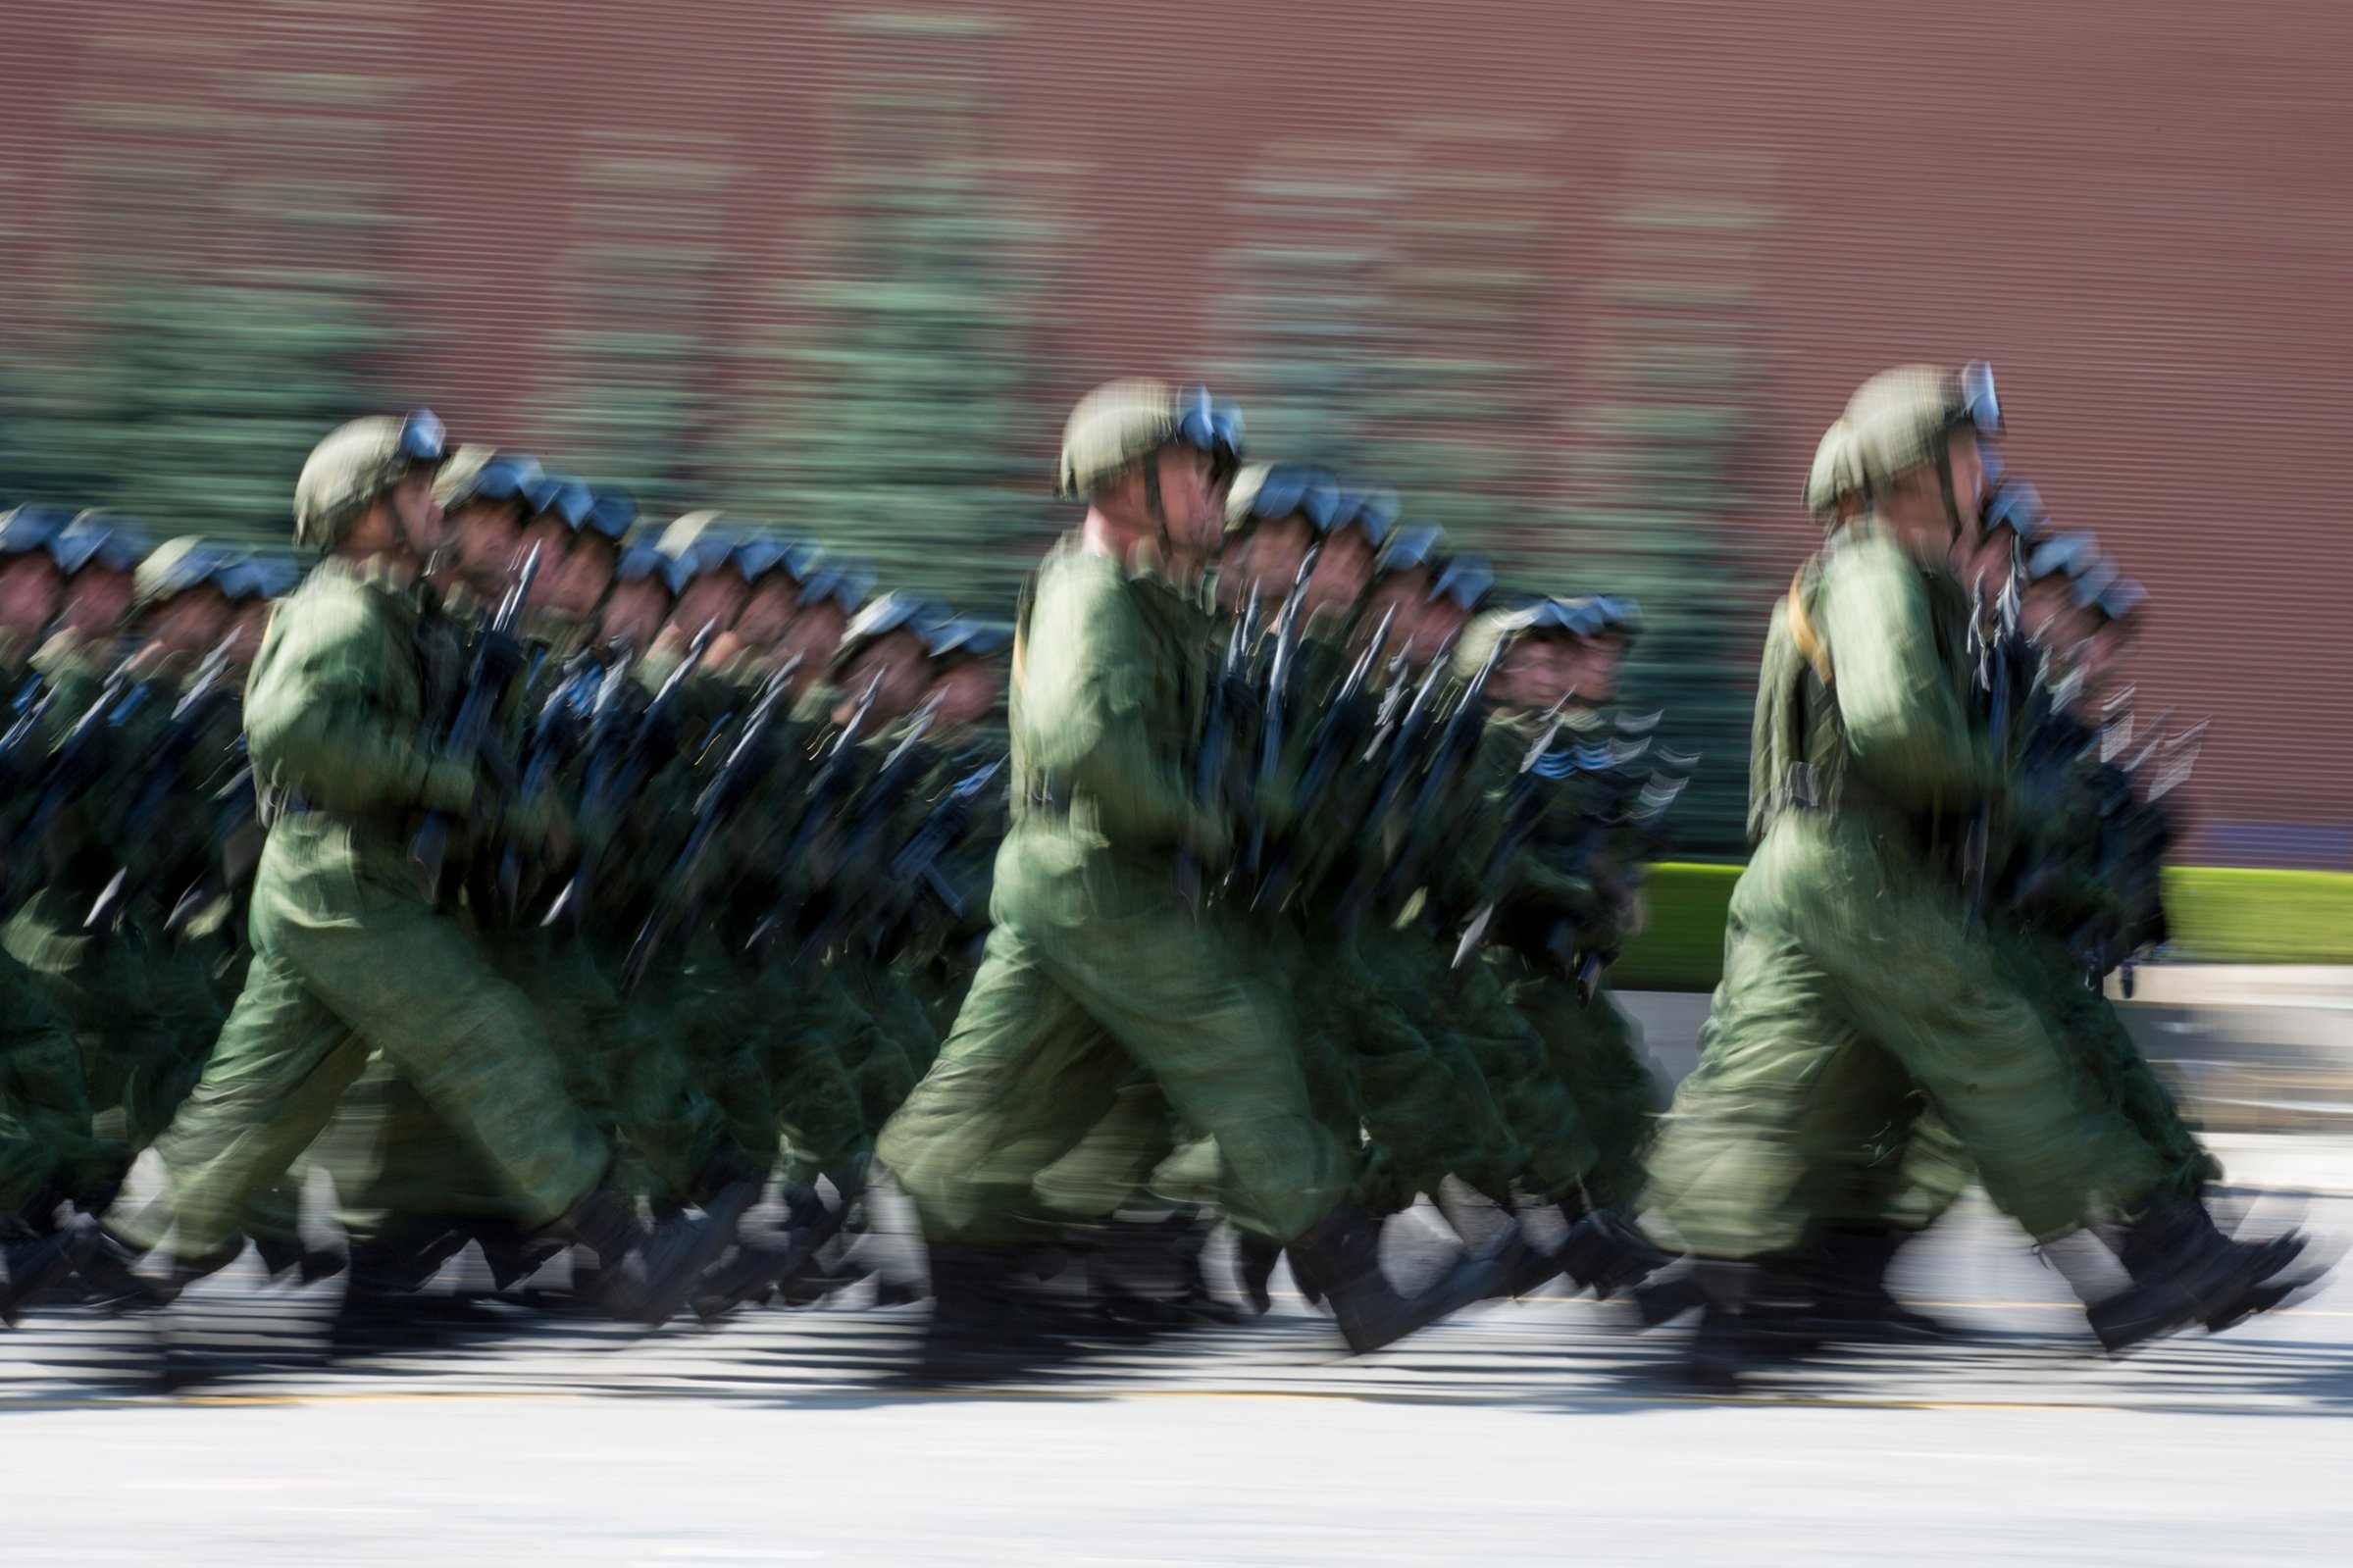 Russian paratroopers march during the celebrations of Paratroopers Day in the Red Square in Moscow, Russia.